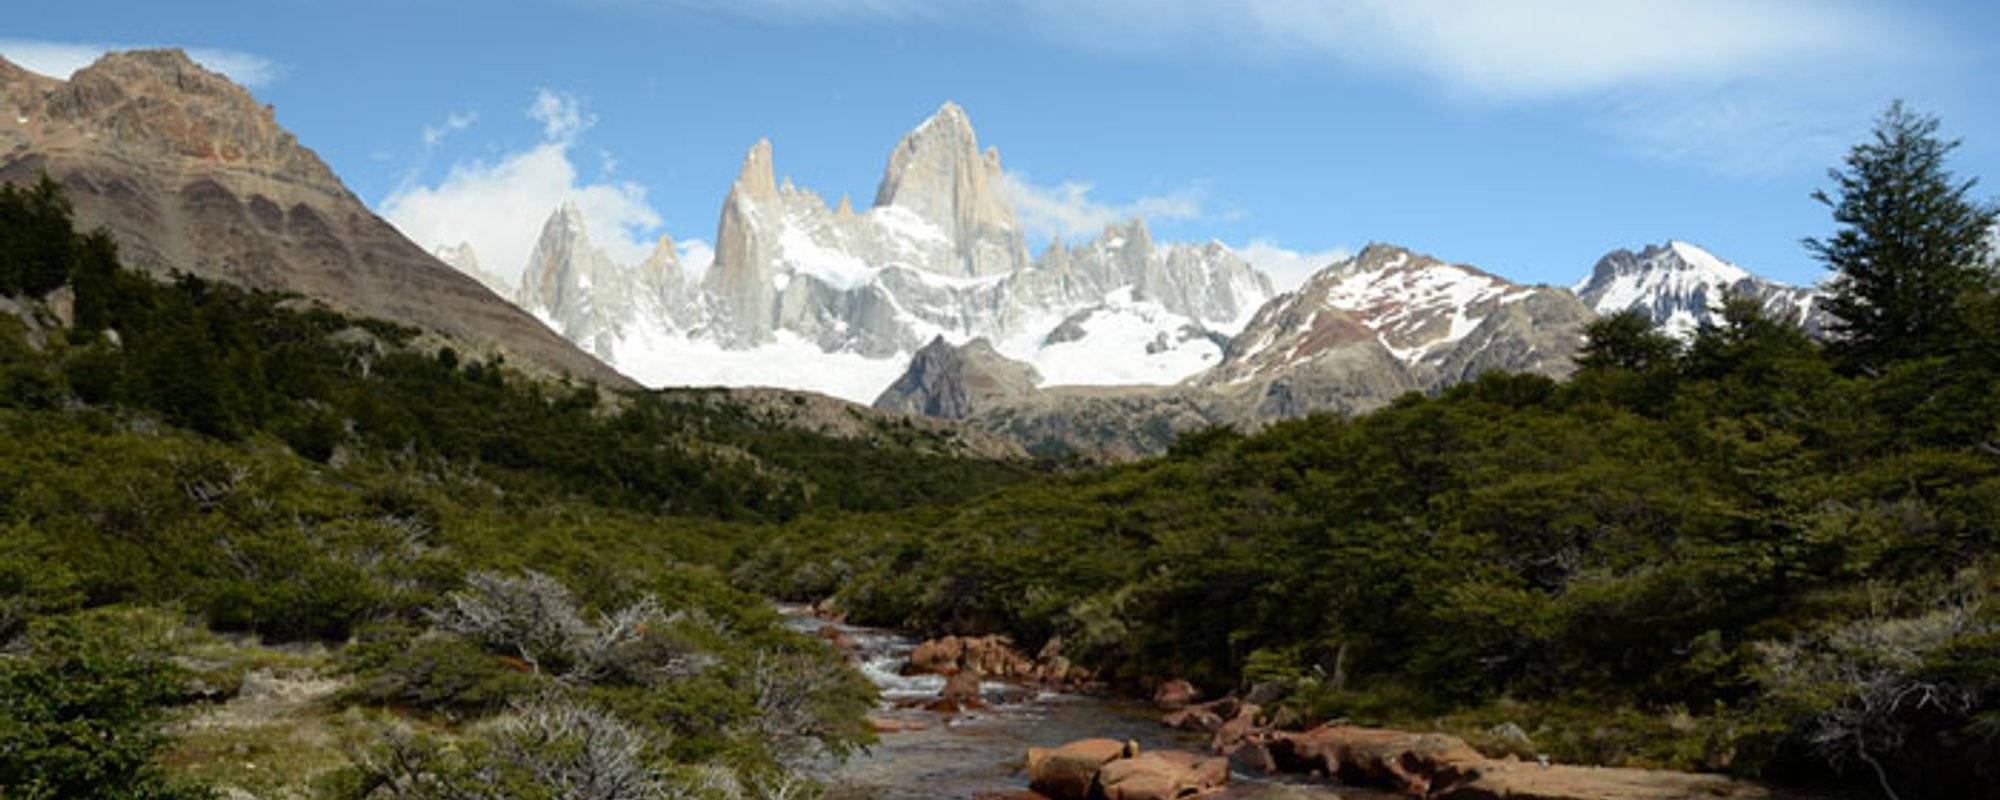 ARGENTINA #2 – highligst of Patagonia: Mt. Fitz Roy